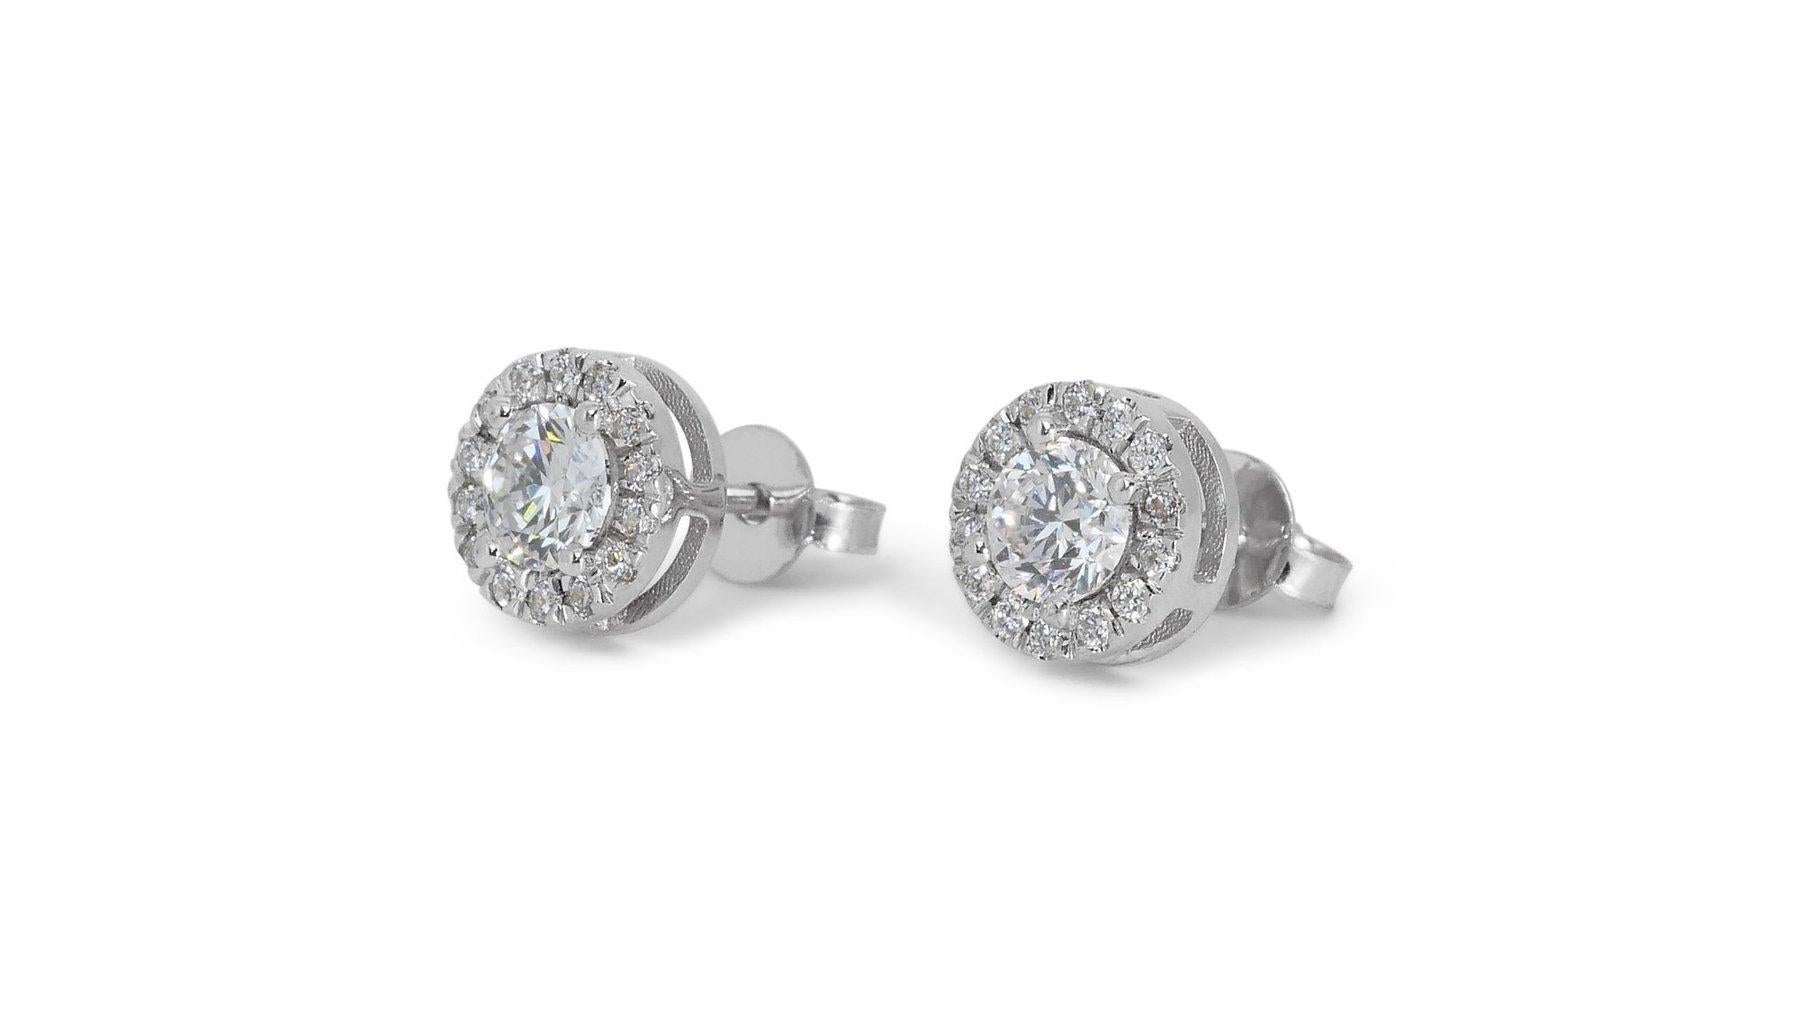 Round Cut Dazzling 1.45ct Diamond Stud Earrings in 18k White Gold - GIA Certified For Sale